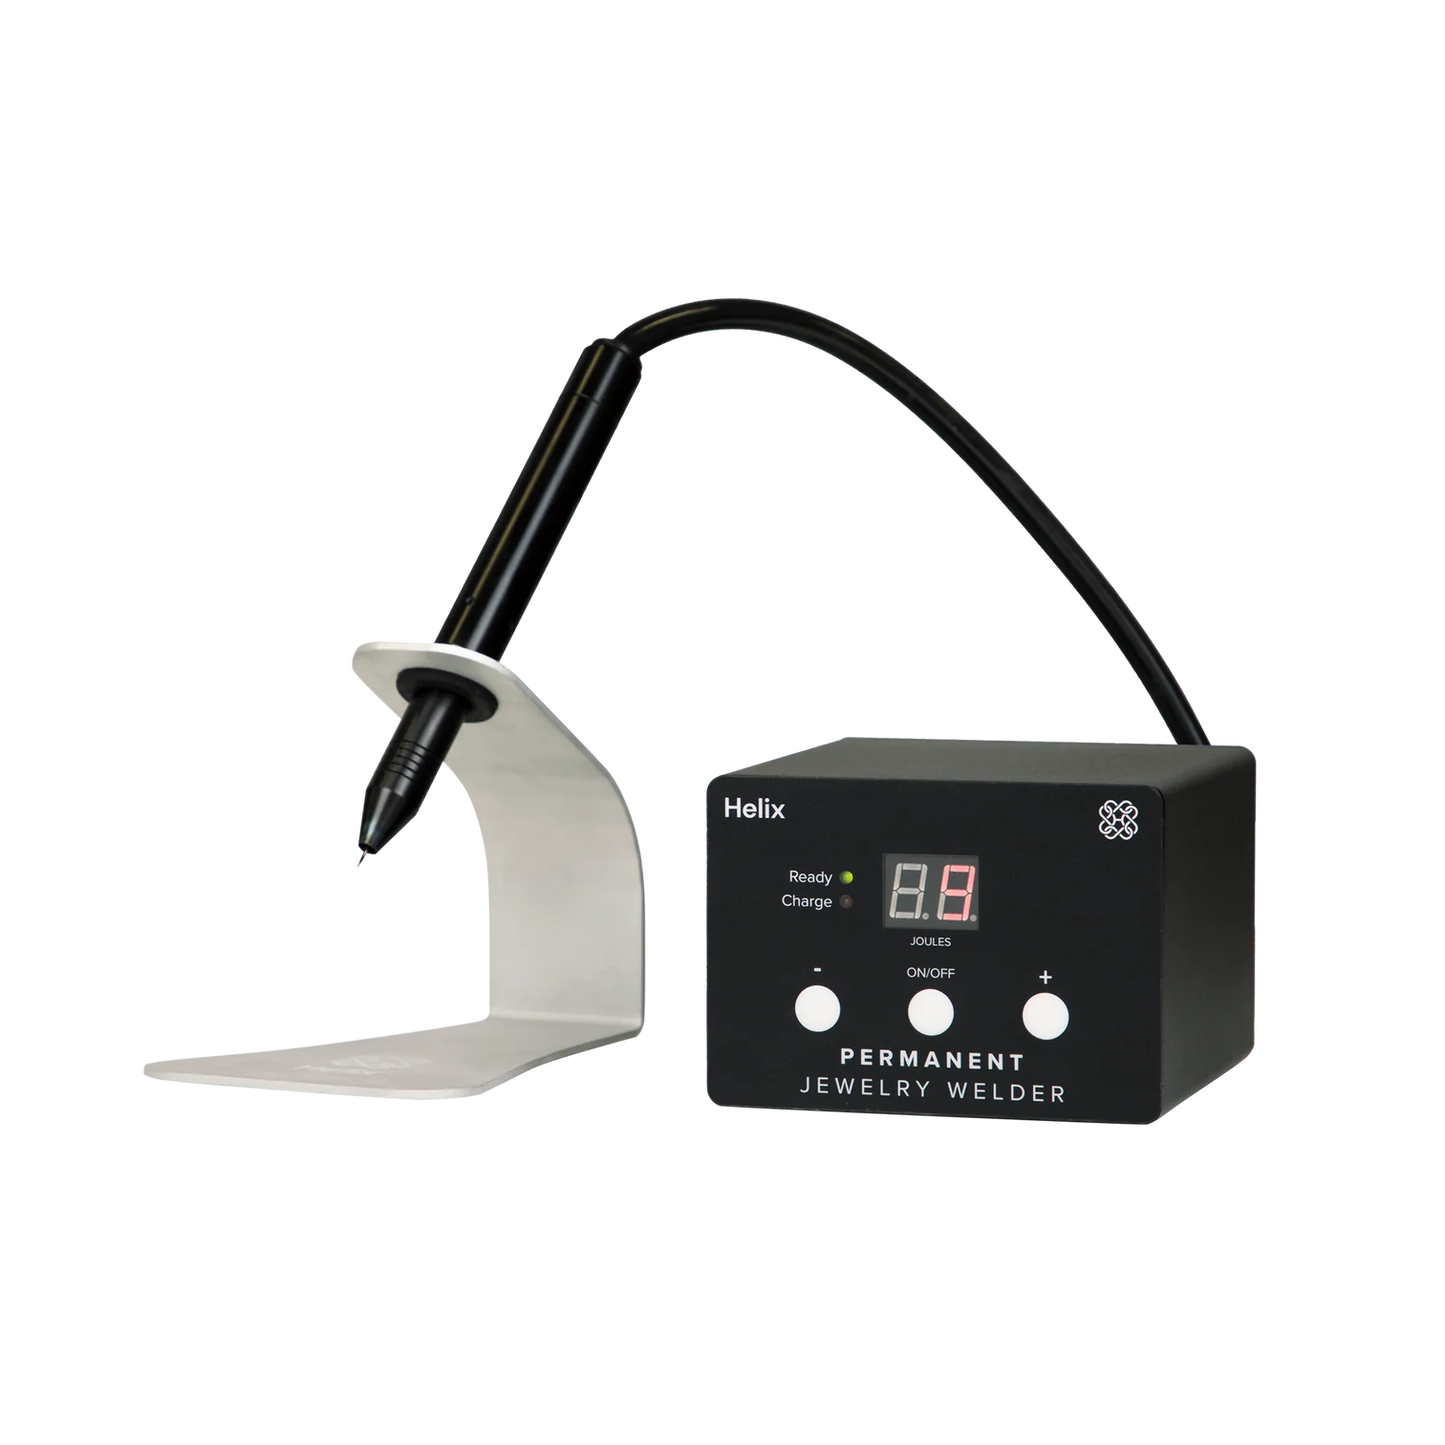 Helix Permanent Jewelry Welder: Machine & Accessories or with Starter Kit